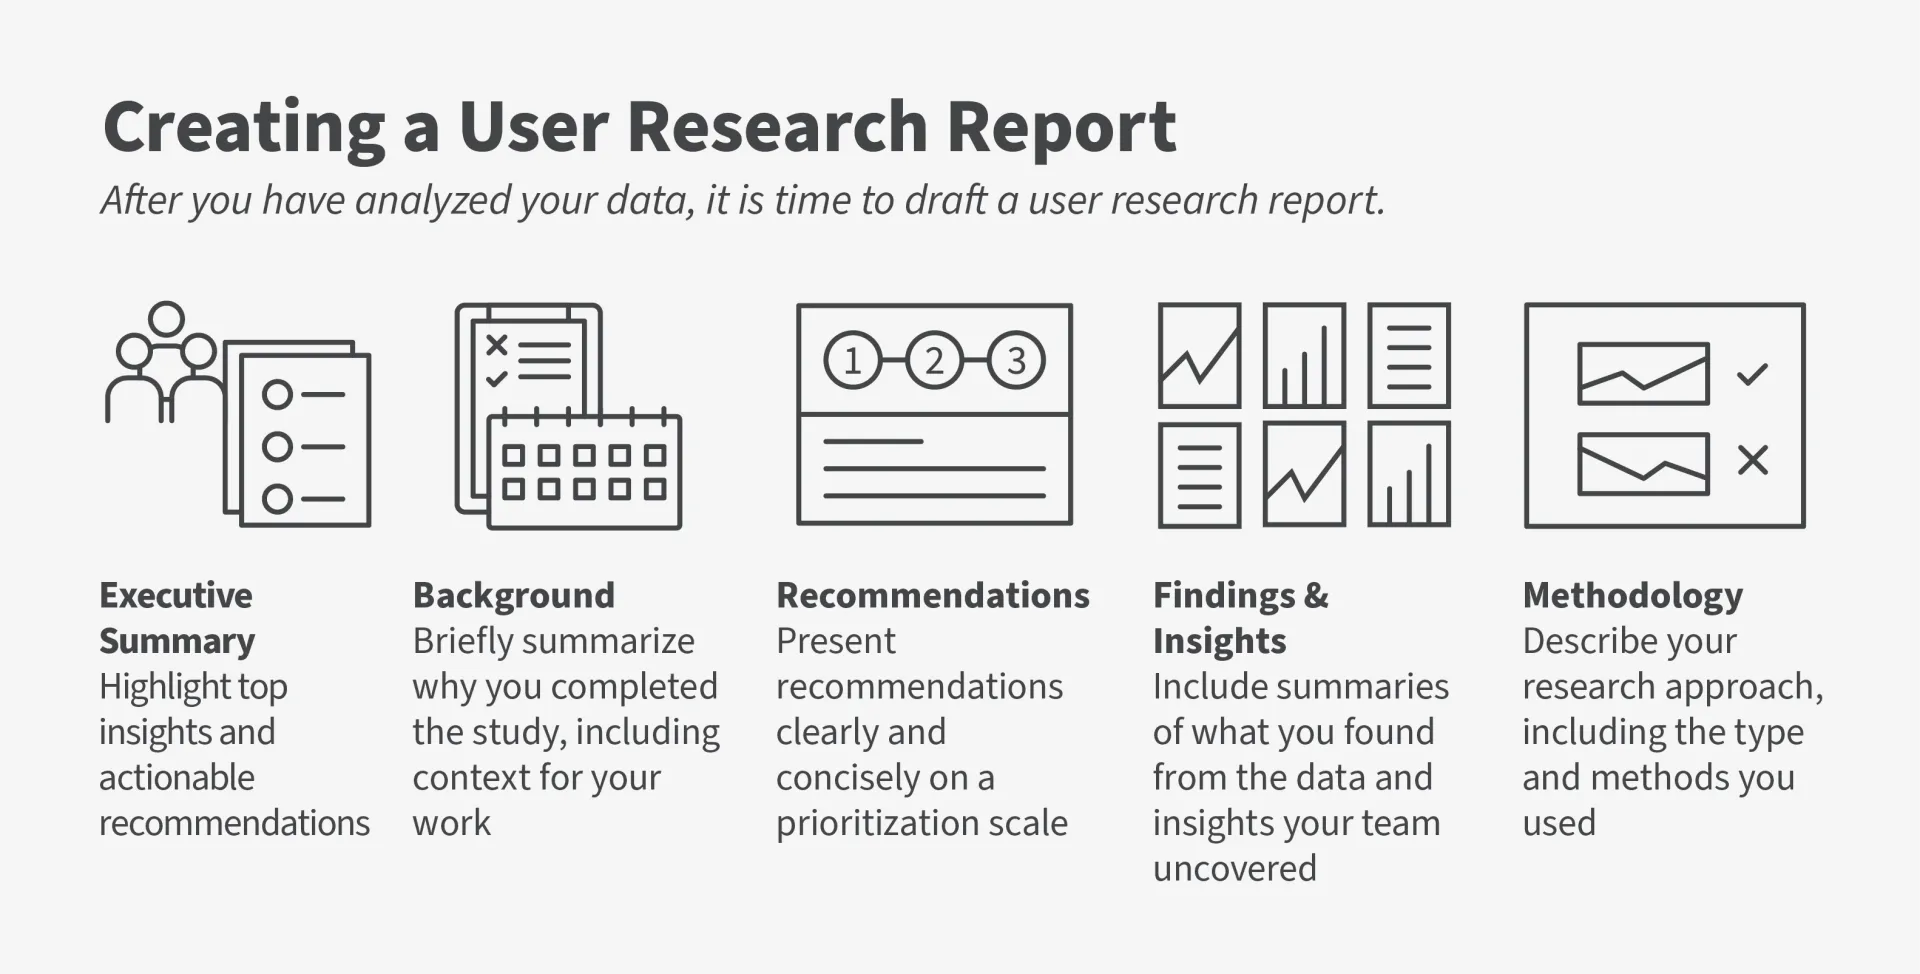 Infographic with five icons showing what to include in a user research report with five sections highlighting a summary, background, recommendations, findings & insights, and methodology.  